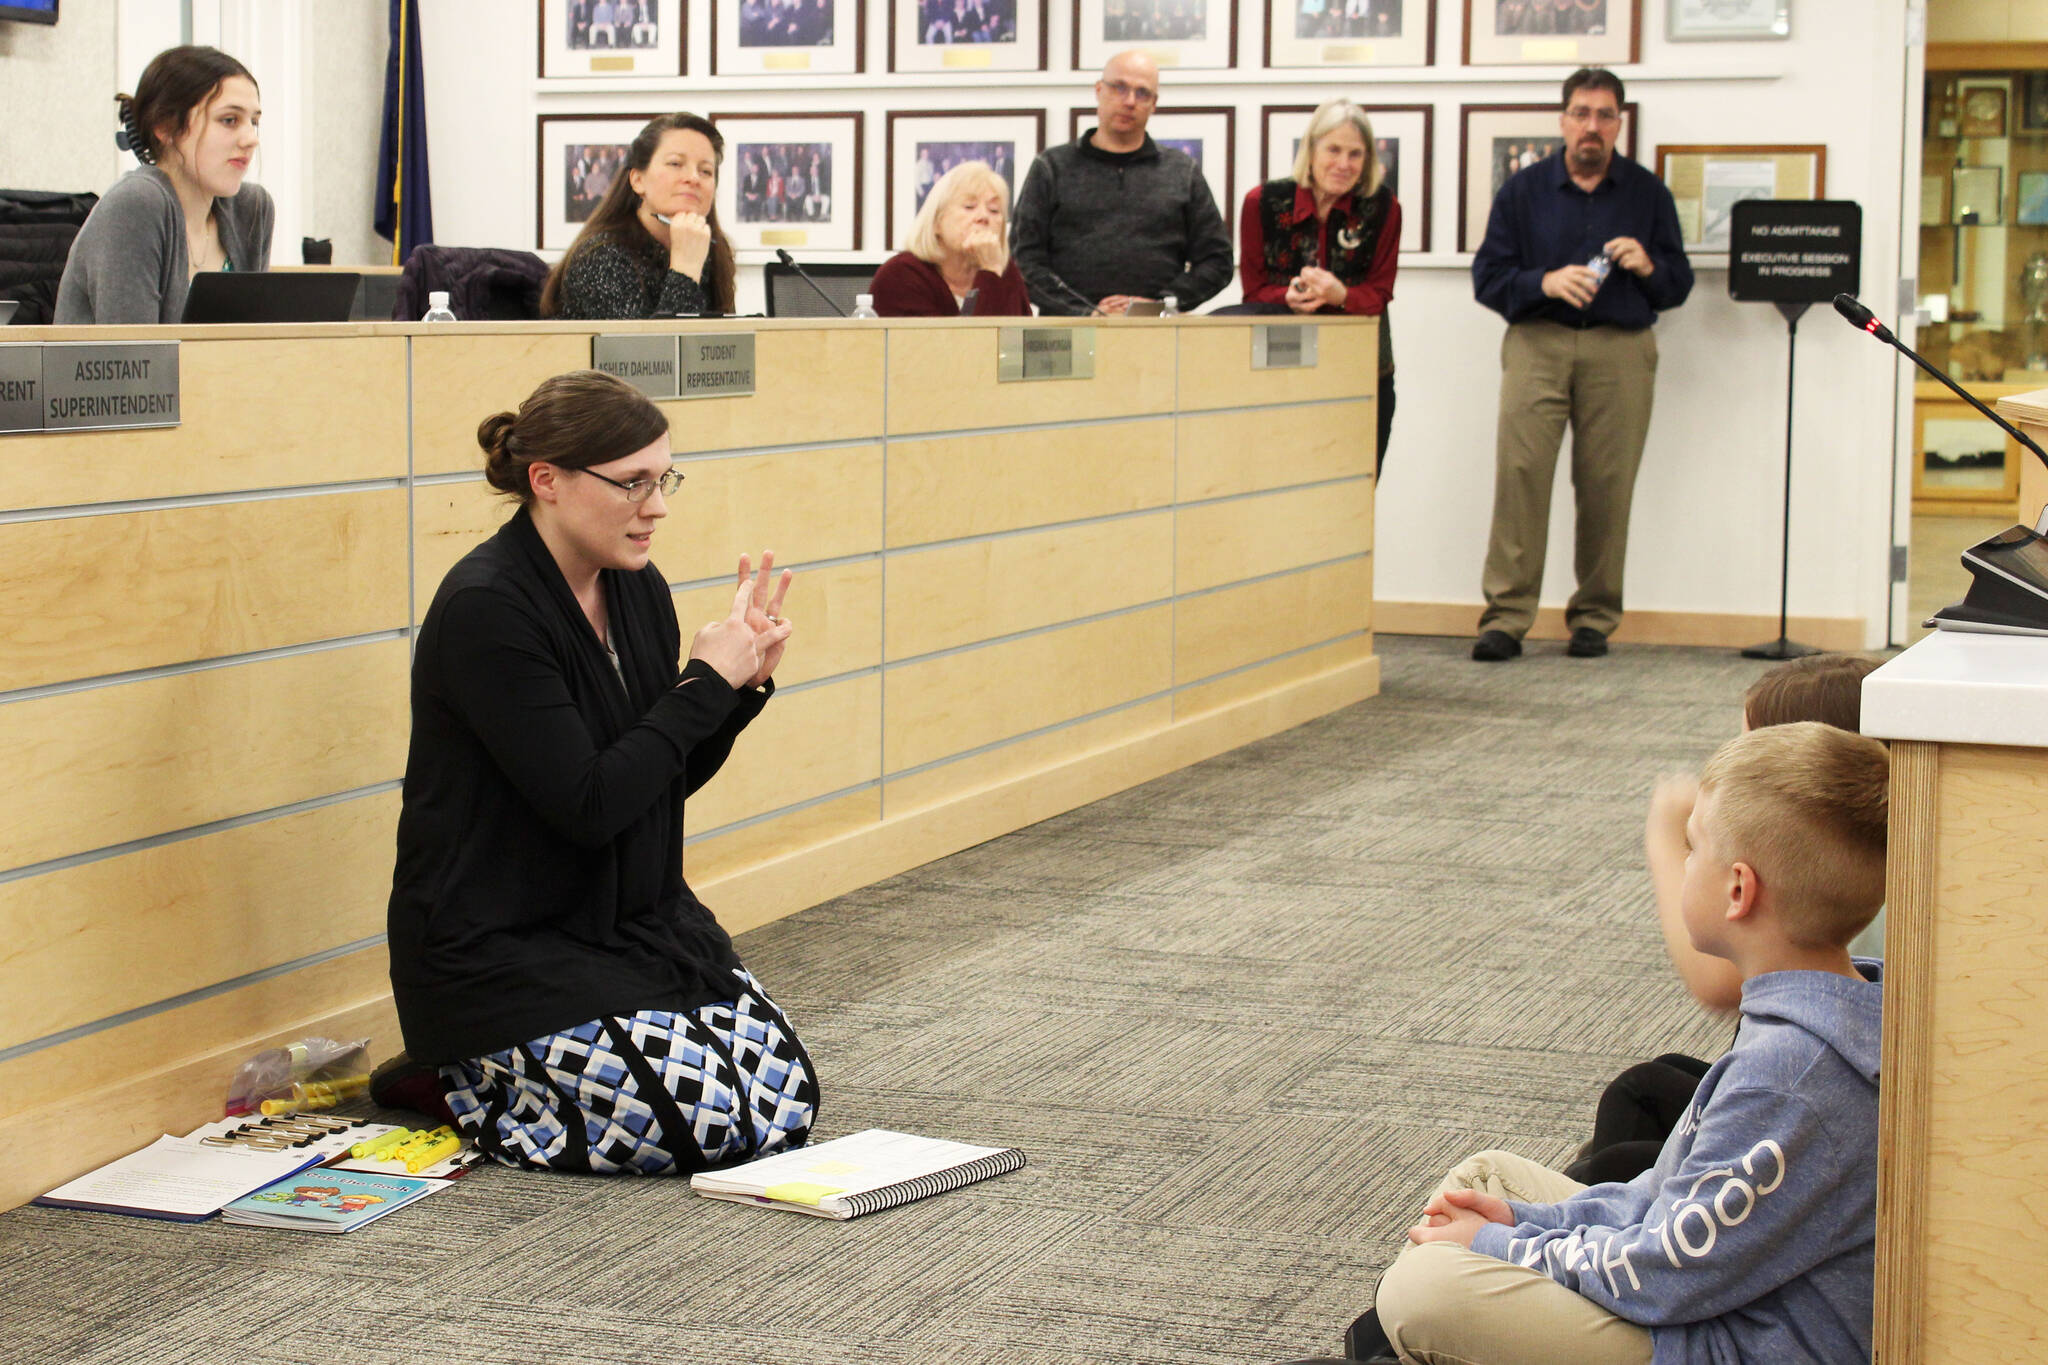 Mountain View Elementary School teacher Kristin Perkins demonstrates with students “phonemic awareness” with practices from Heggerty during a board of education meeting on Monday, Dec. 5, 2022, in Soldotna, Alaska. (Ashlyn O’Hara/Peninsula Clarion)